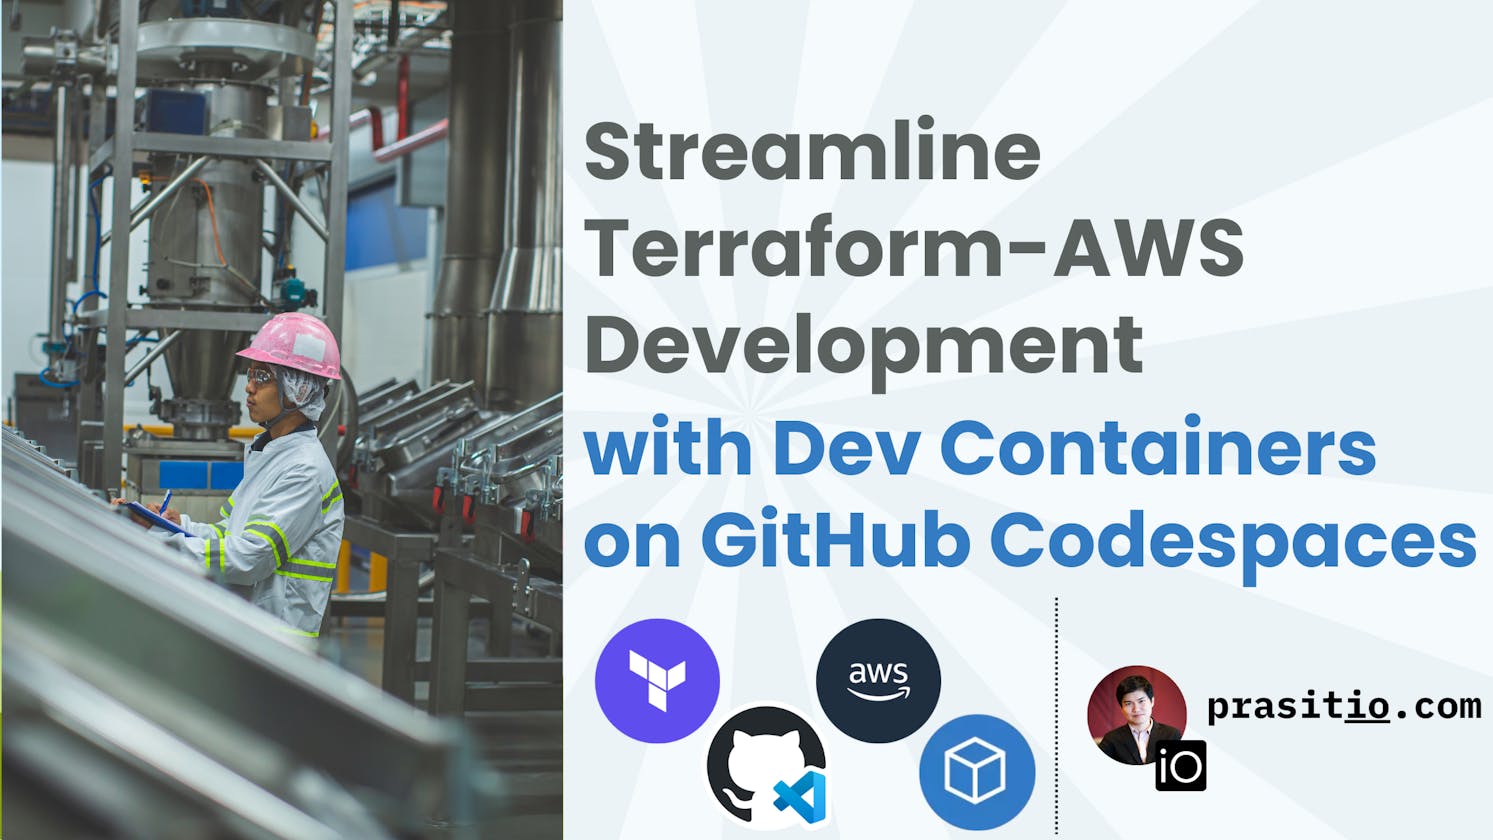 Streamline Terraform-AWS Development with Dev Containers in GitHub Codespaces